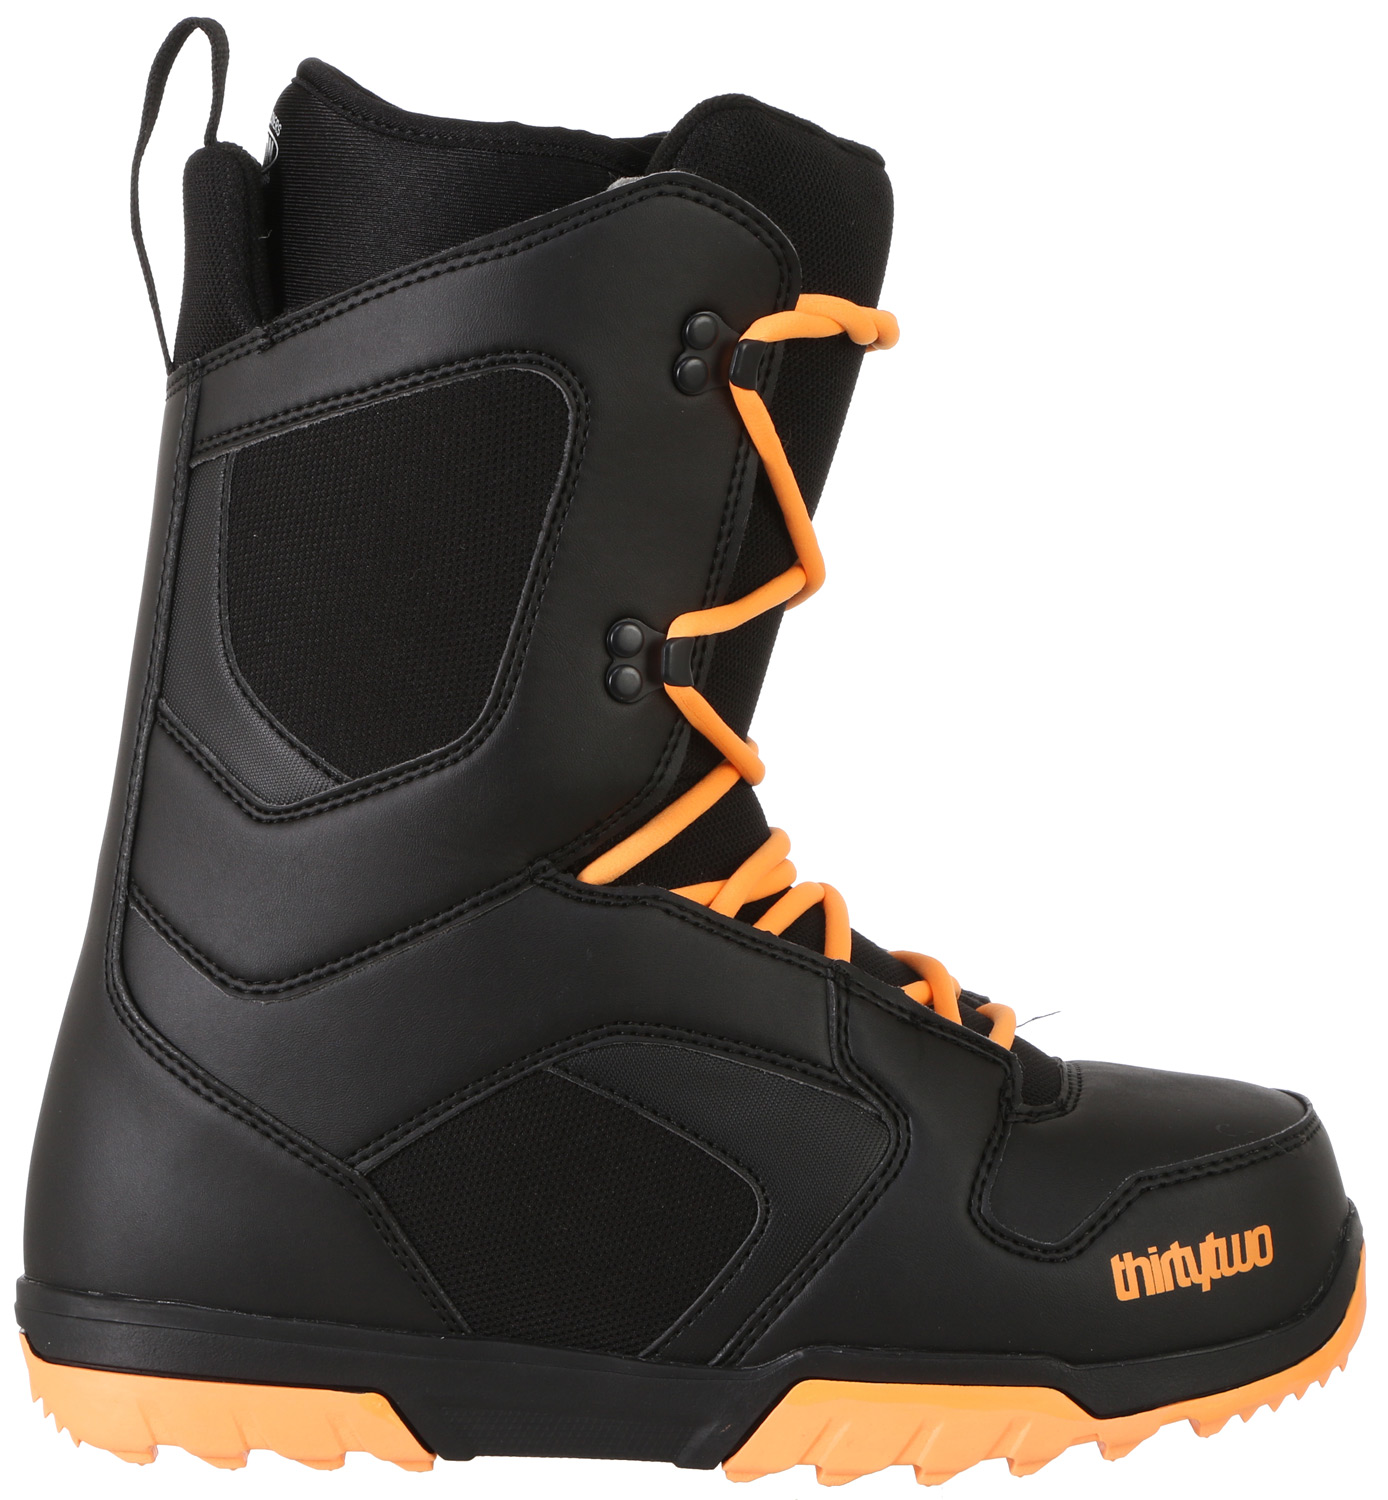 snowboarding boots 32 - thirty two exit snowboard boots BEPKATX